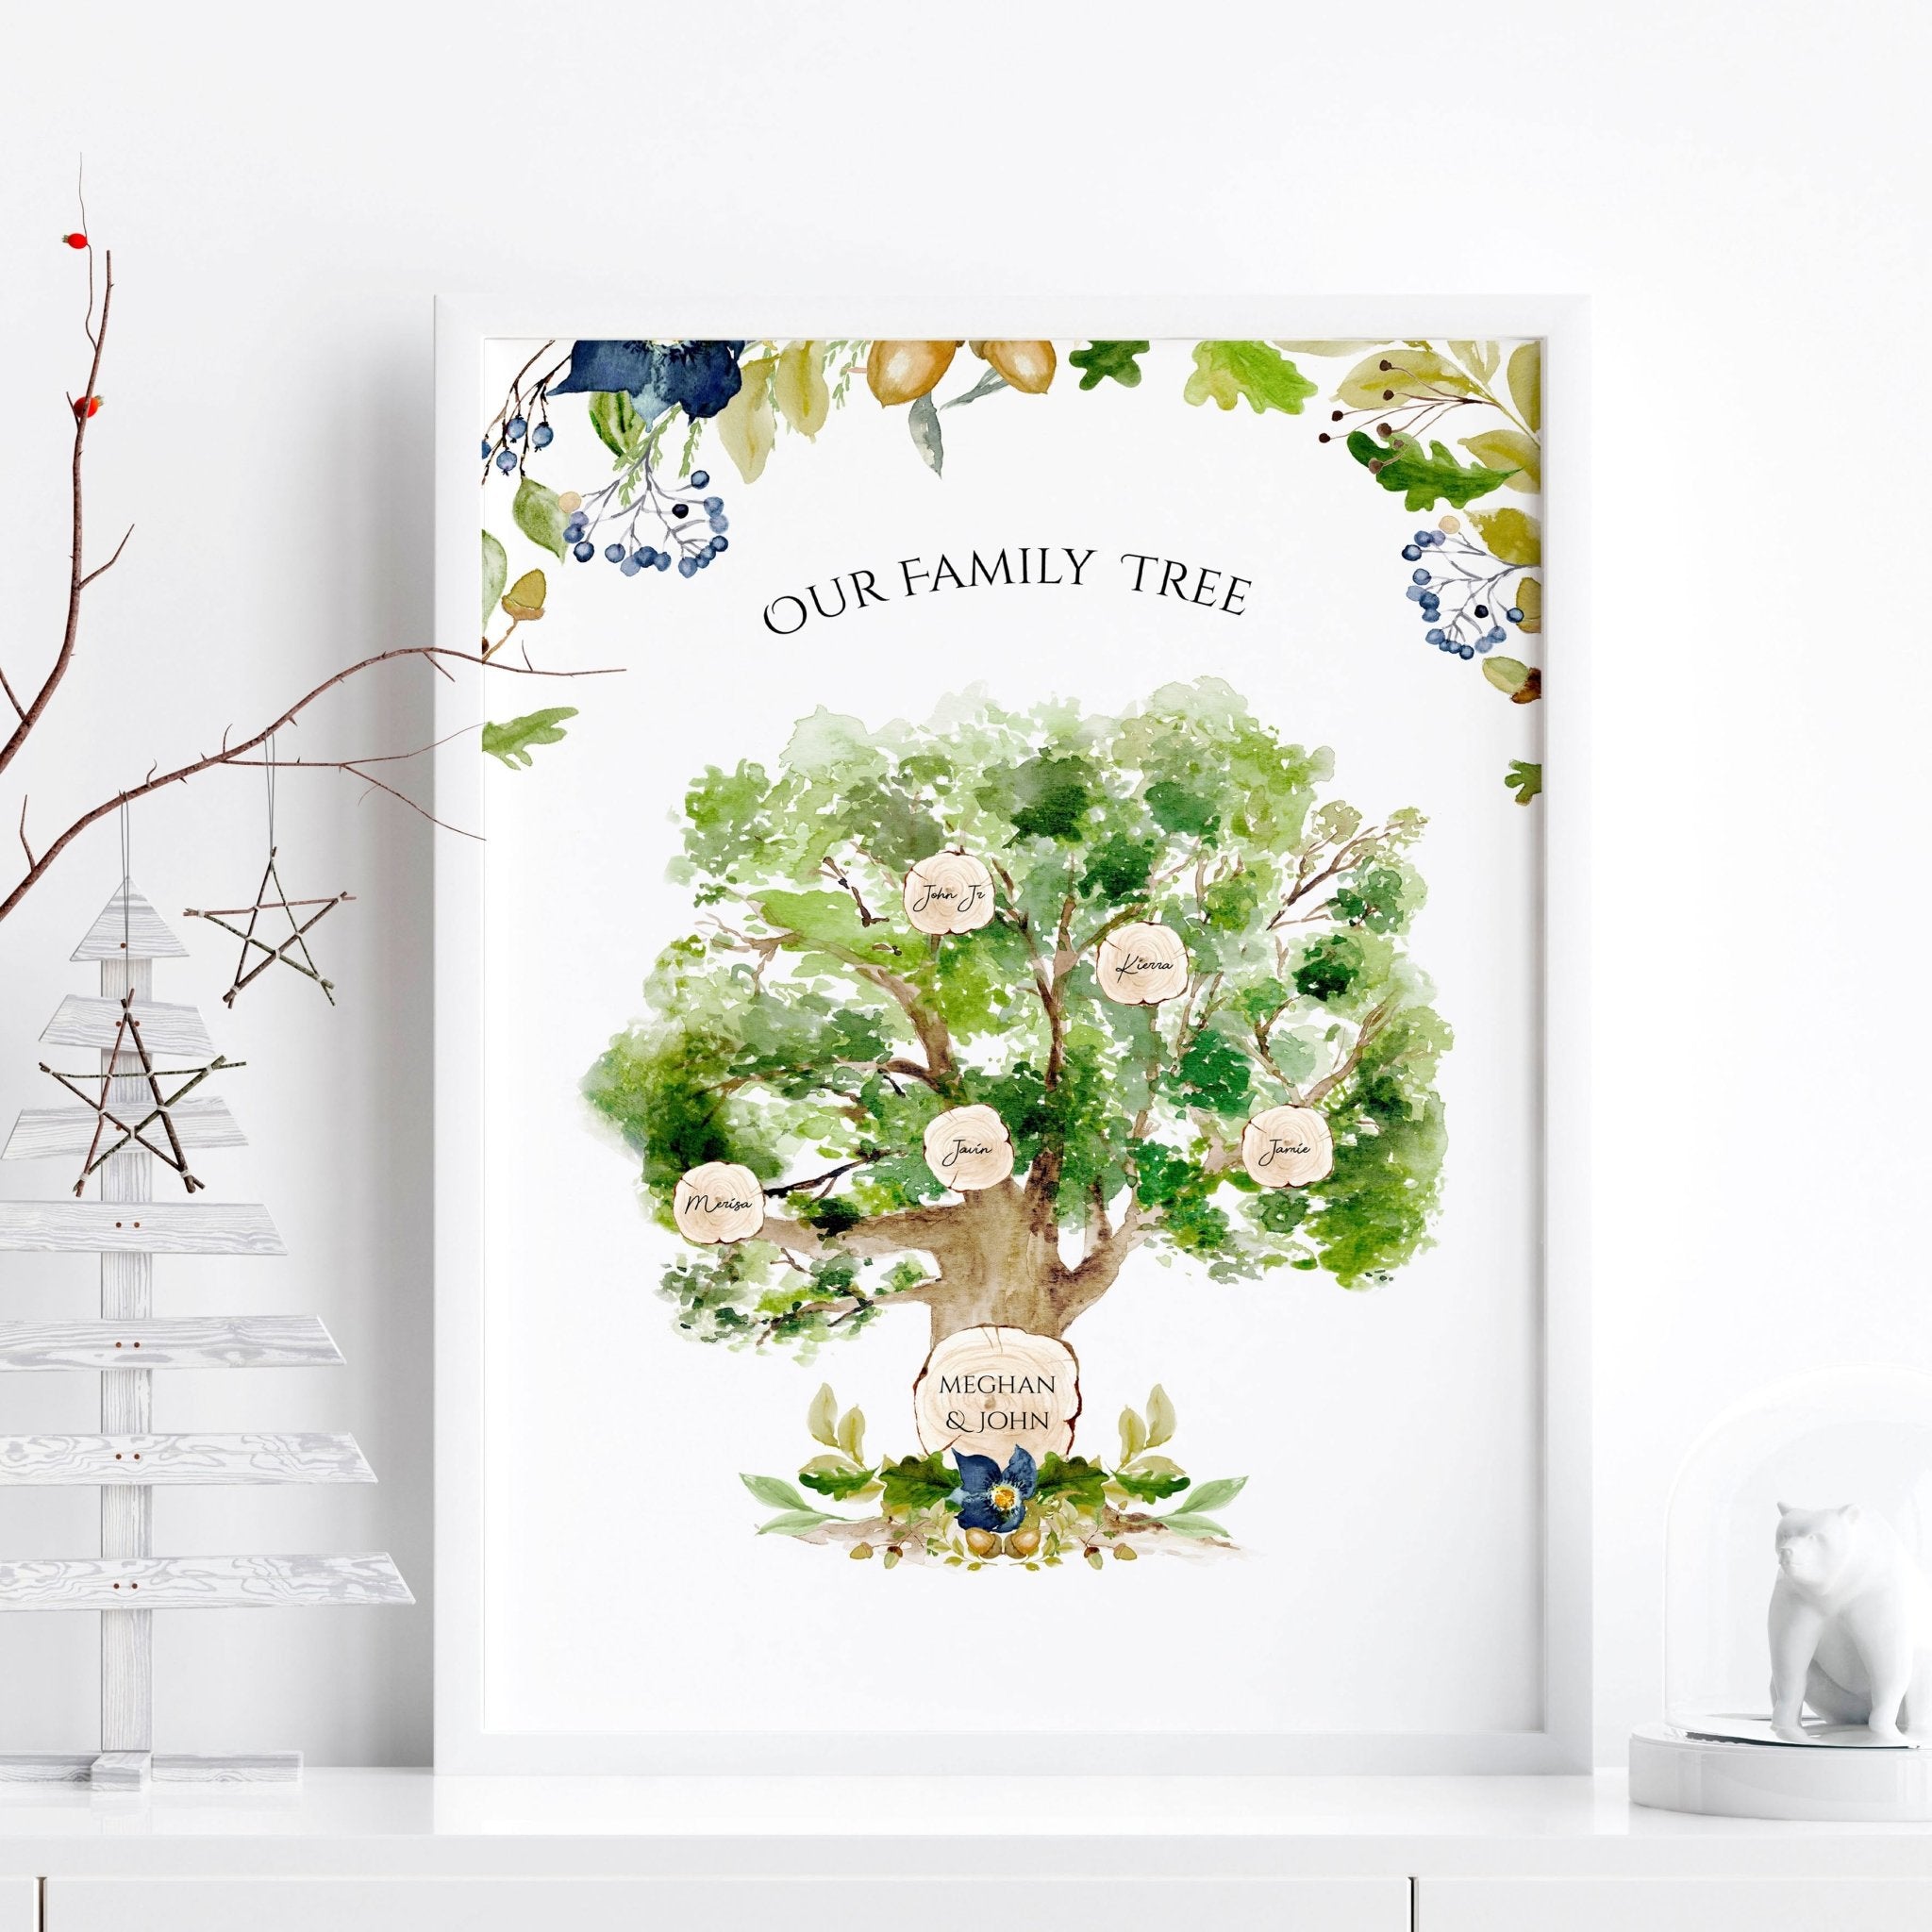 Personalized Family tree wall art print - About Wall Art